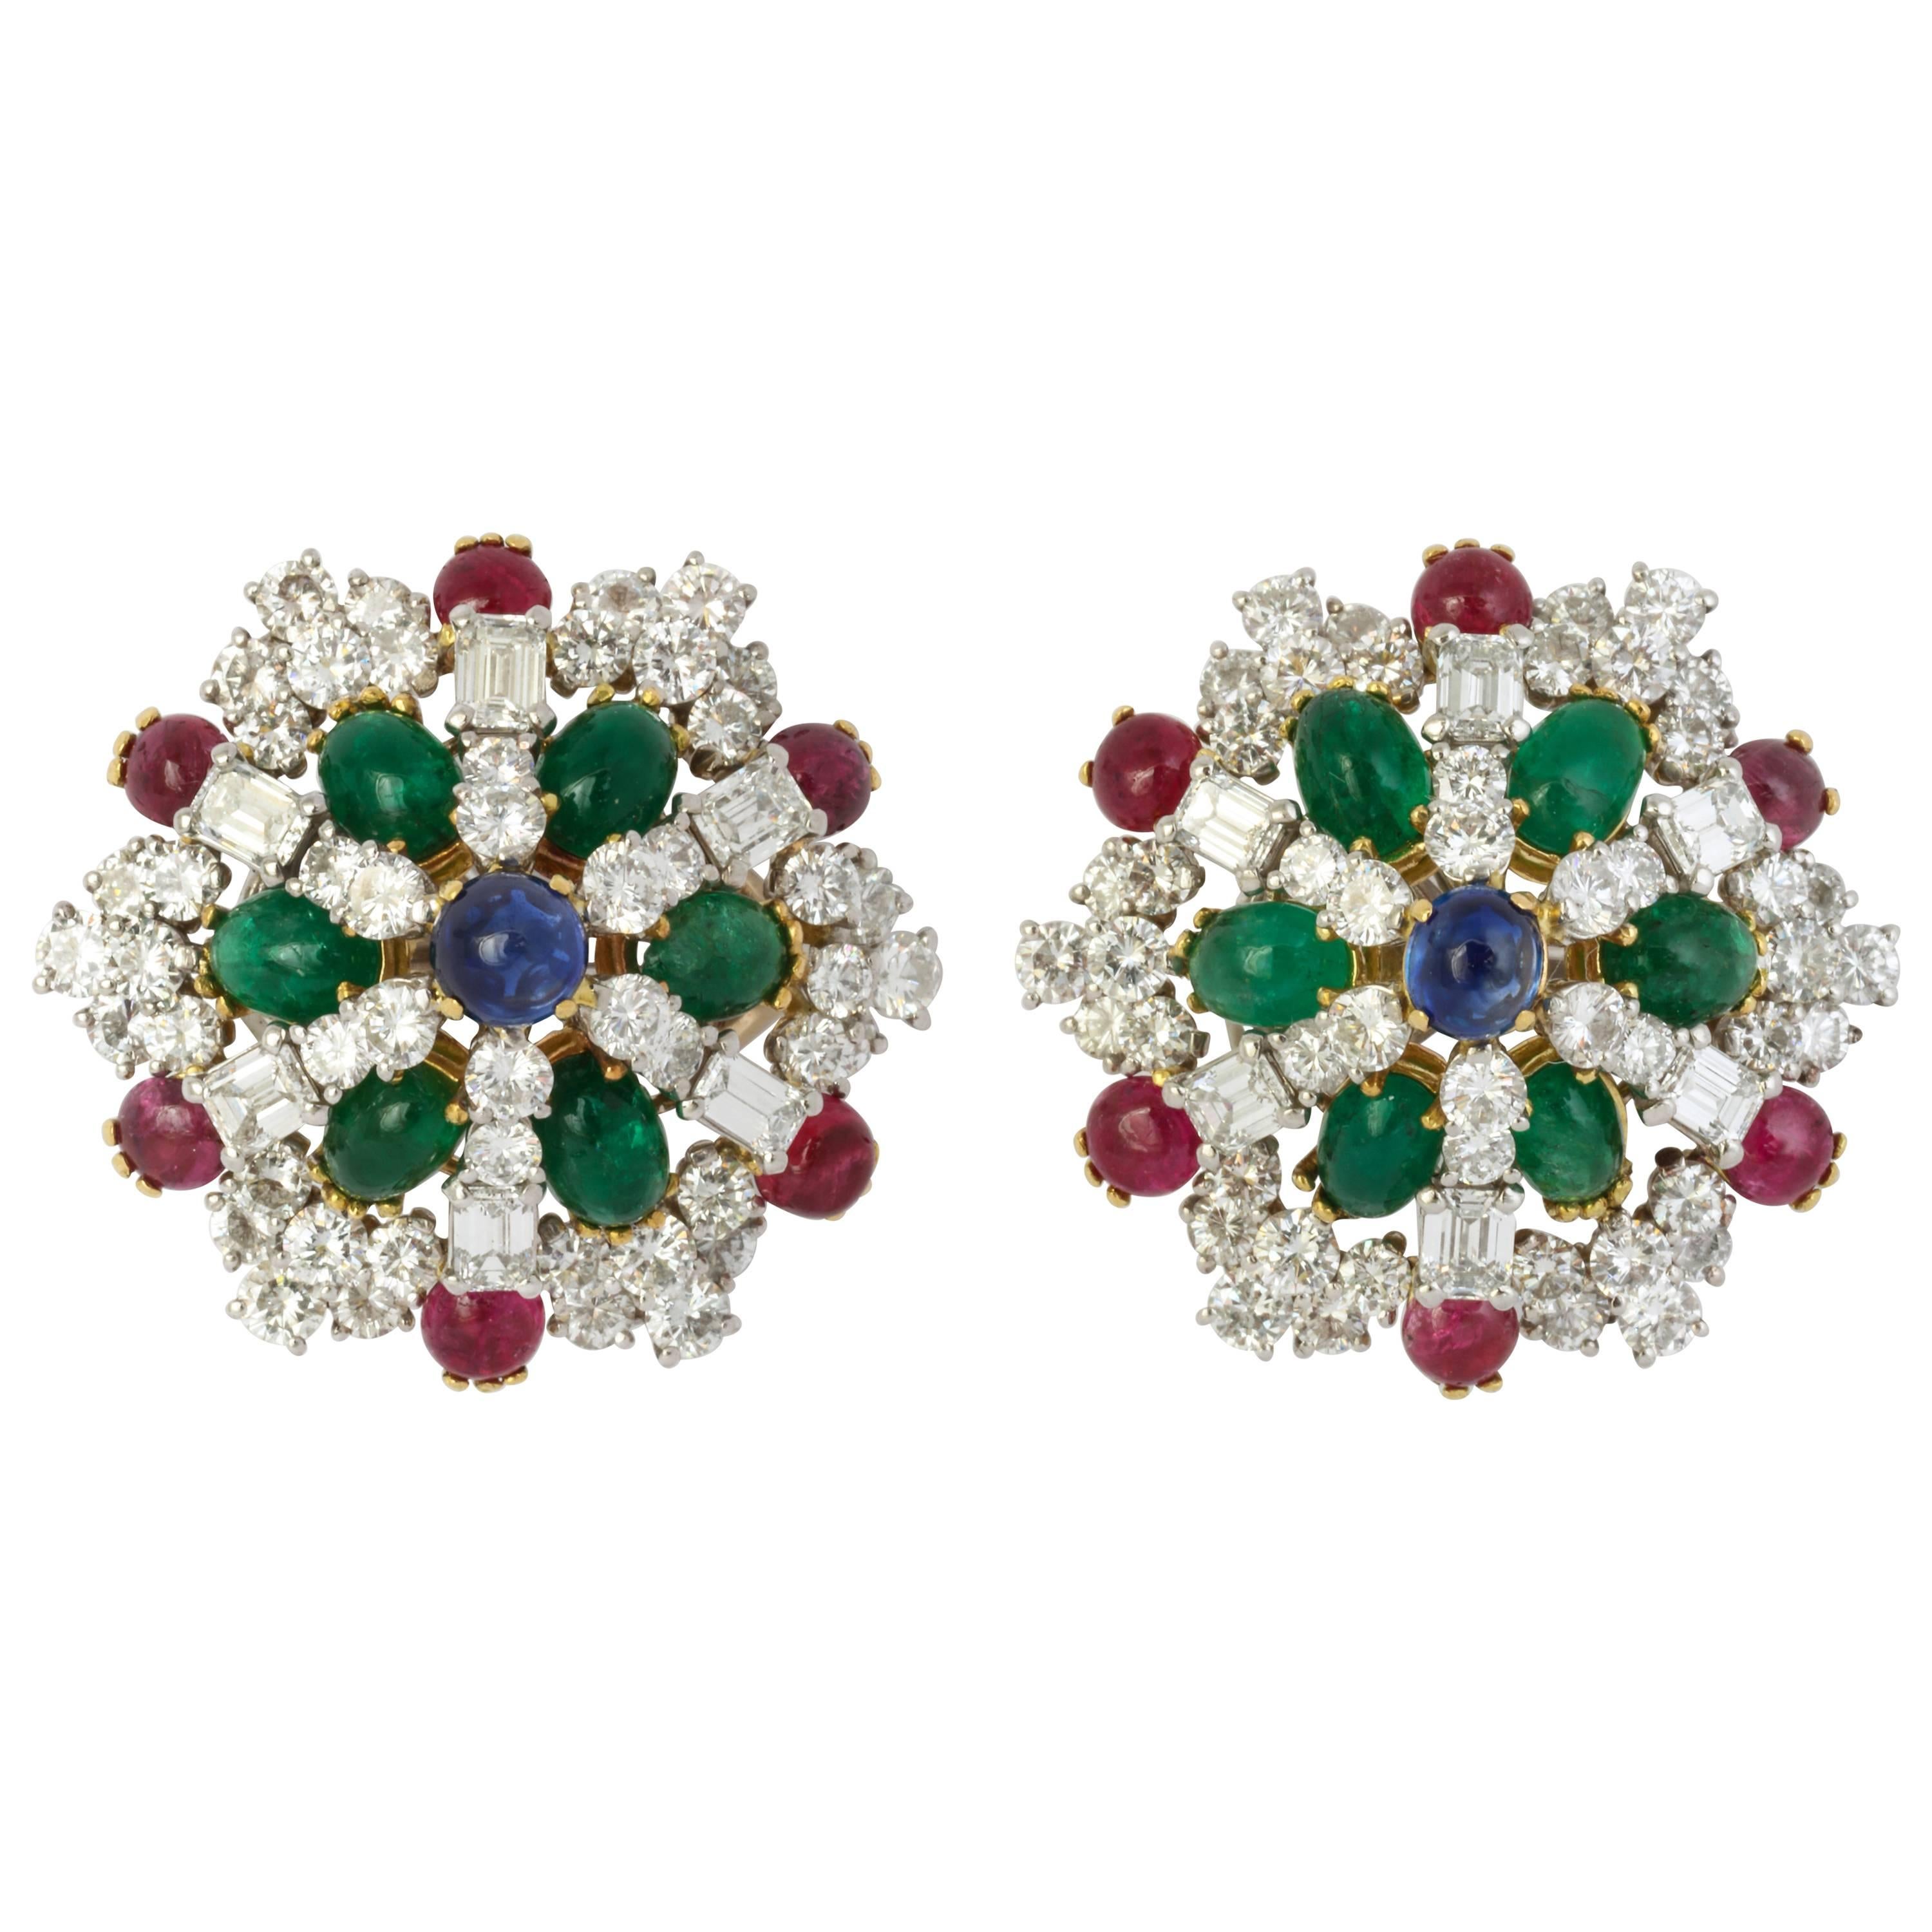 Multi Gem Clip-on Earrings with Sapphire, Emerald, Ruby and Diamonds